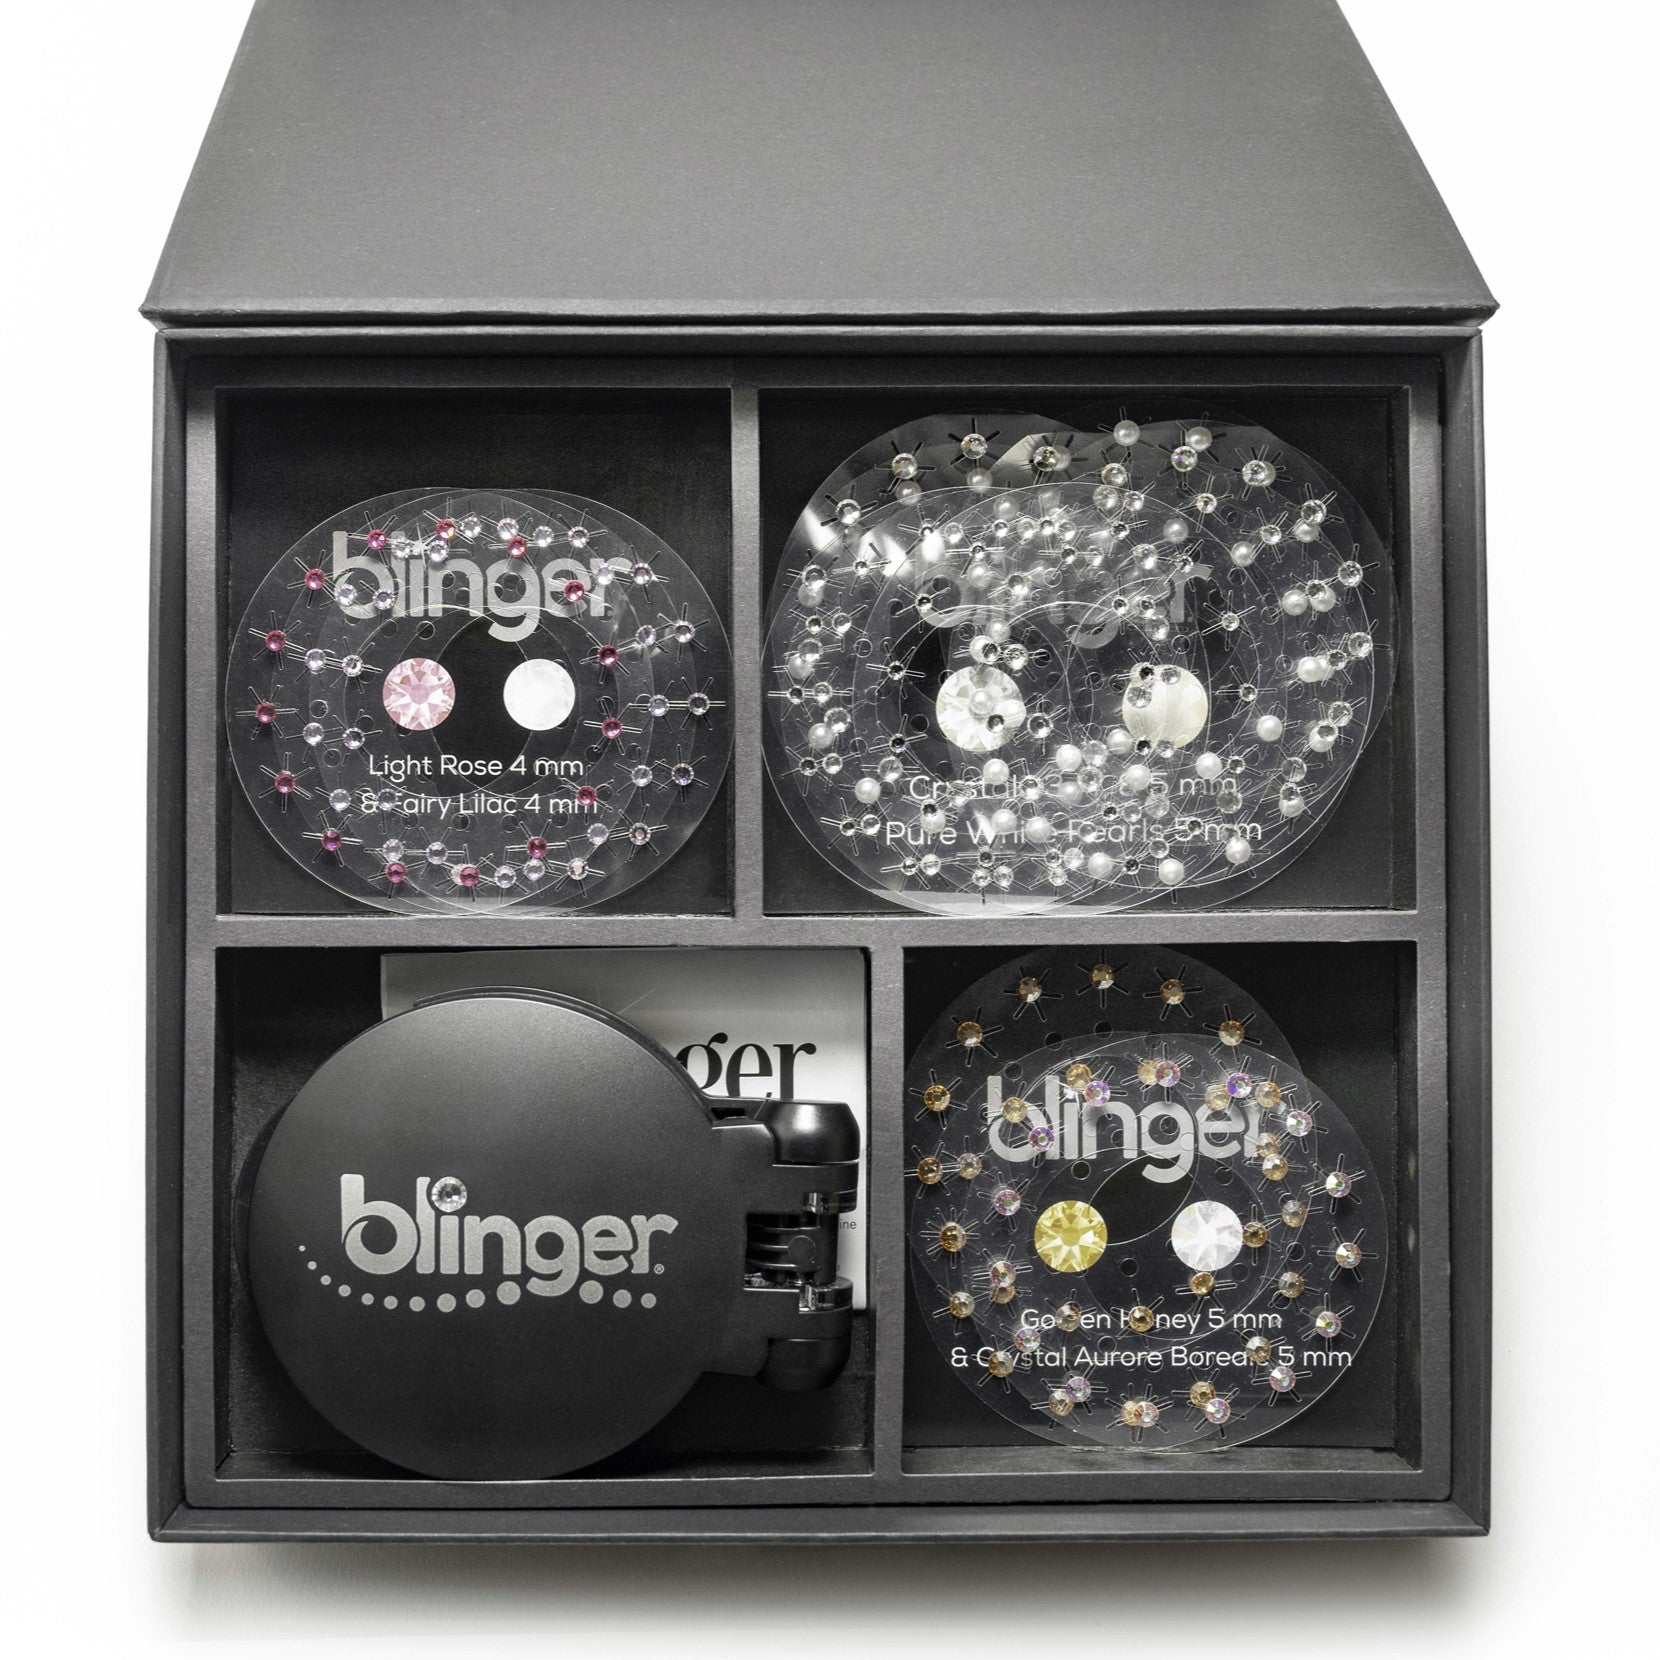 BLINGER SPARKLE COLLECTION REFILL PACK – Simply Carolina